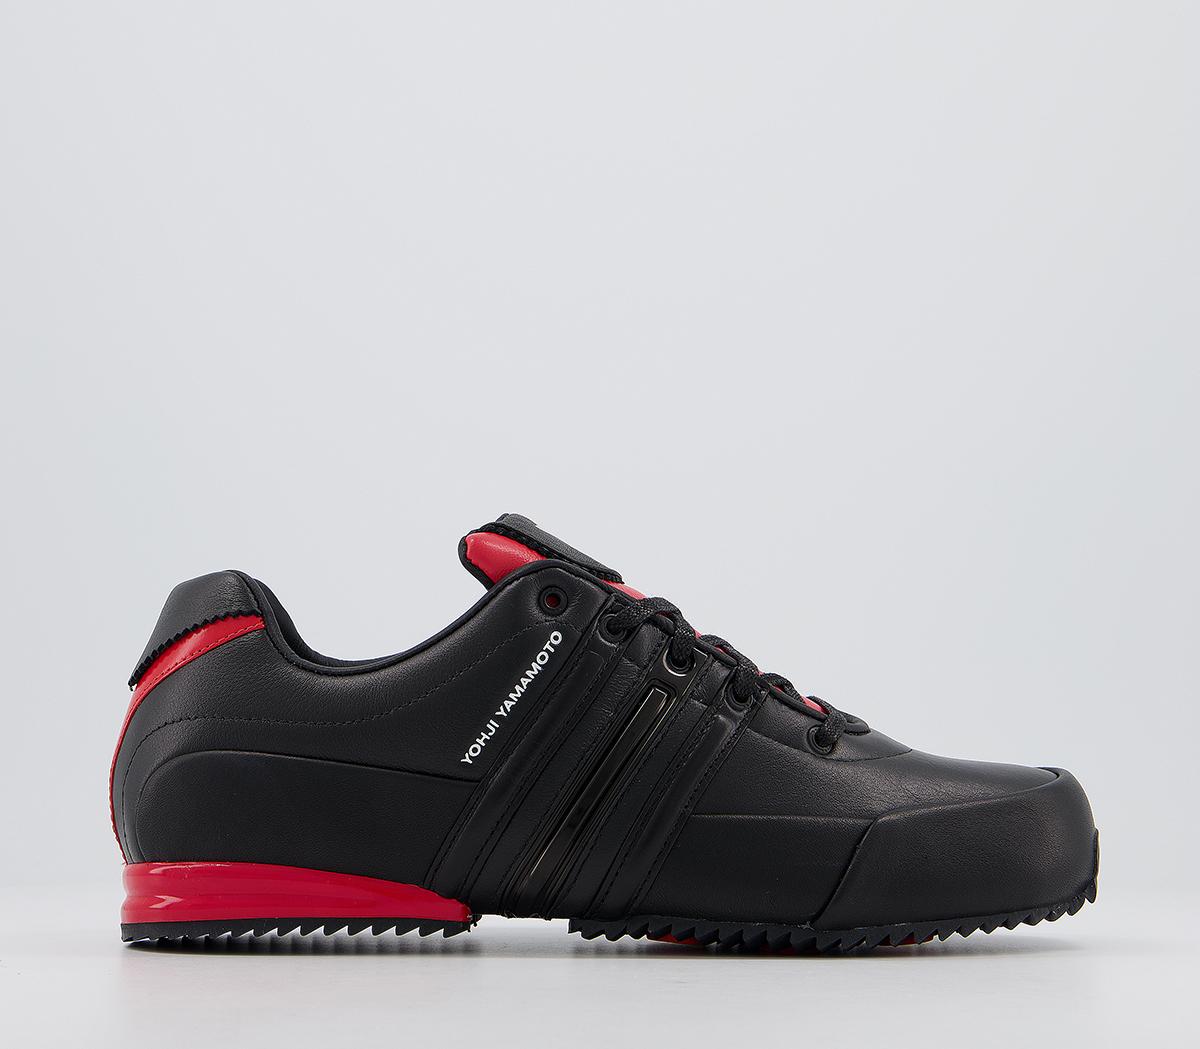 adidas Y-3 Y-3 Sprint Trainers Black Red - Women's Trainers